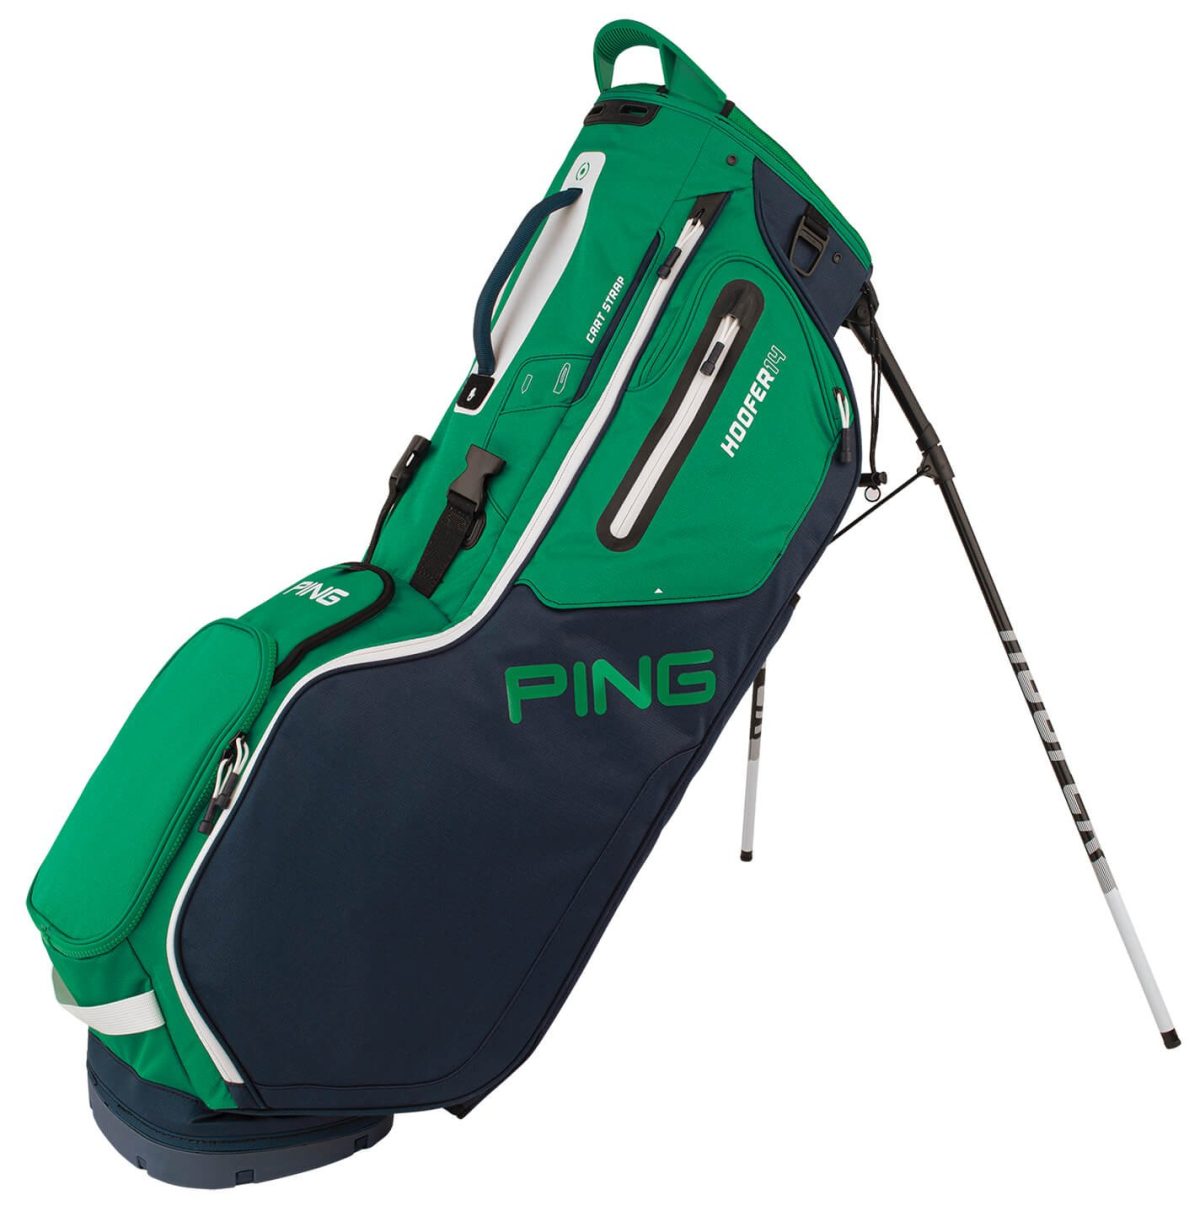 PING Men's Hoofer 14 Stand Bag, Polyester/Rayon in Navy/Green/White